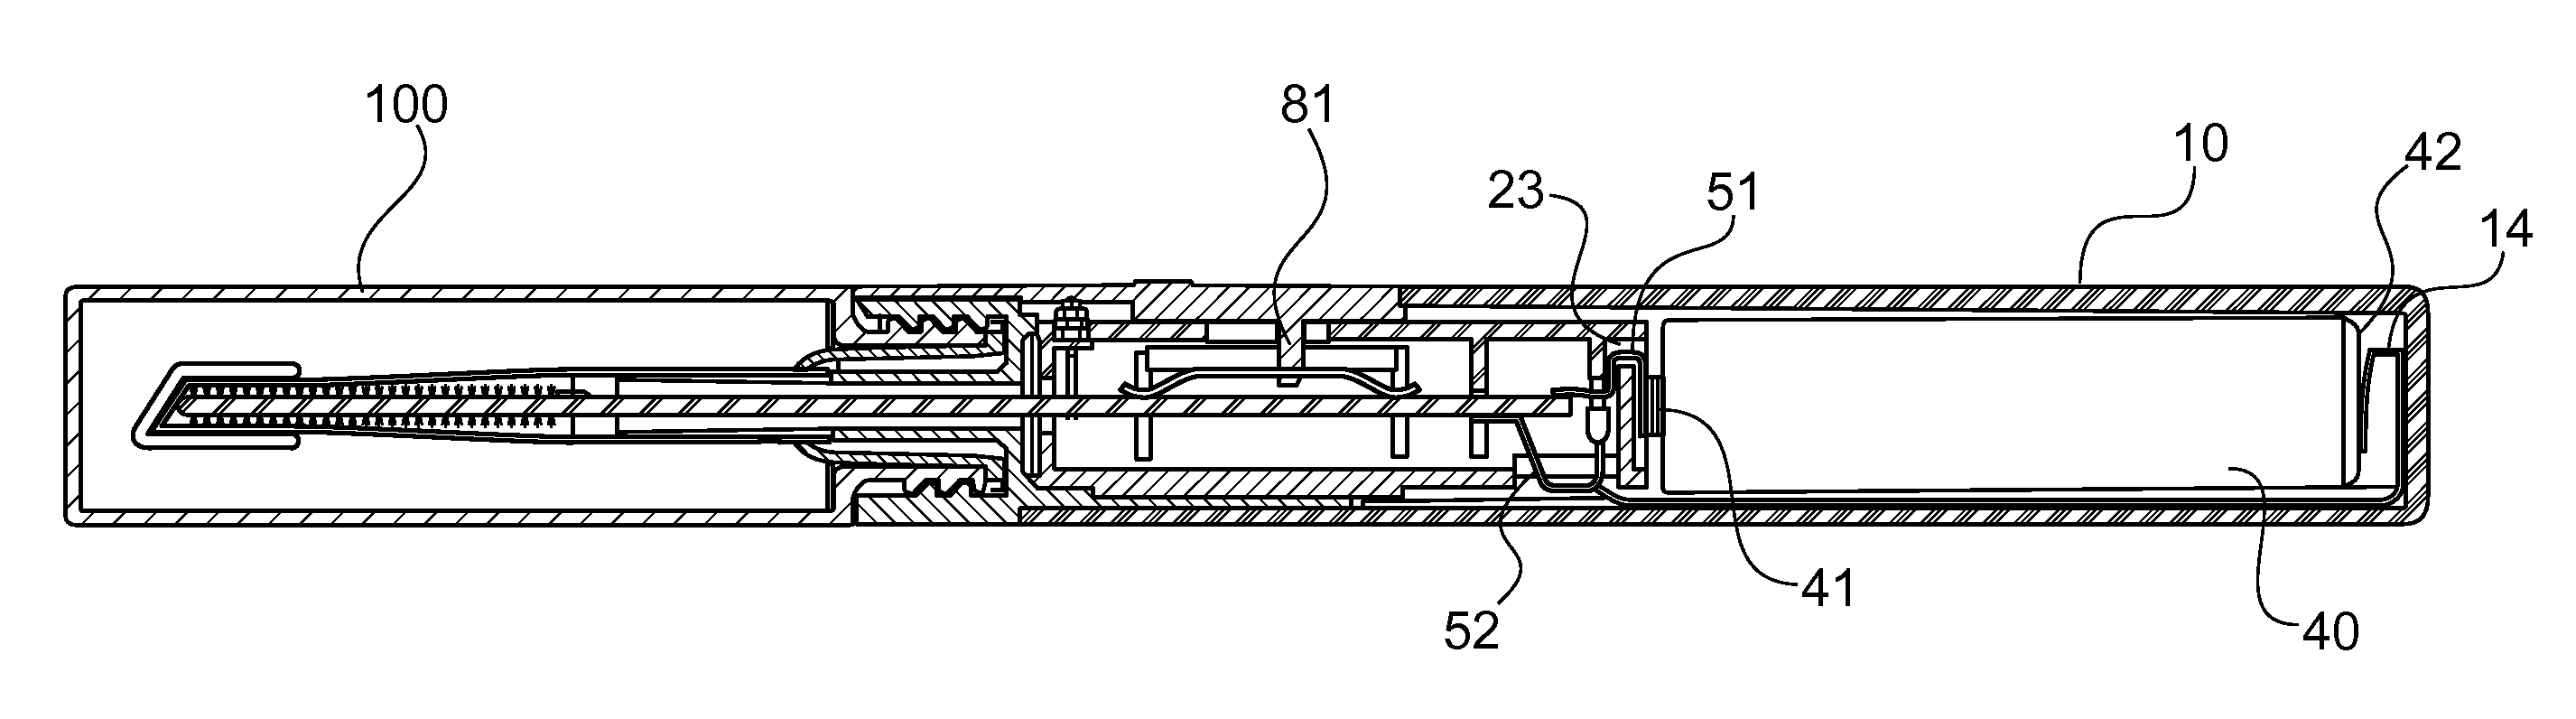 Cosmetic applicators containing heating elements